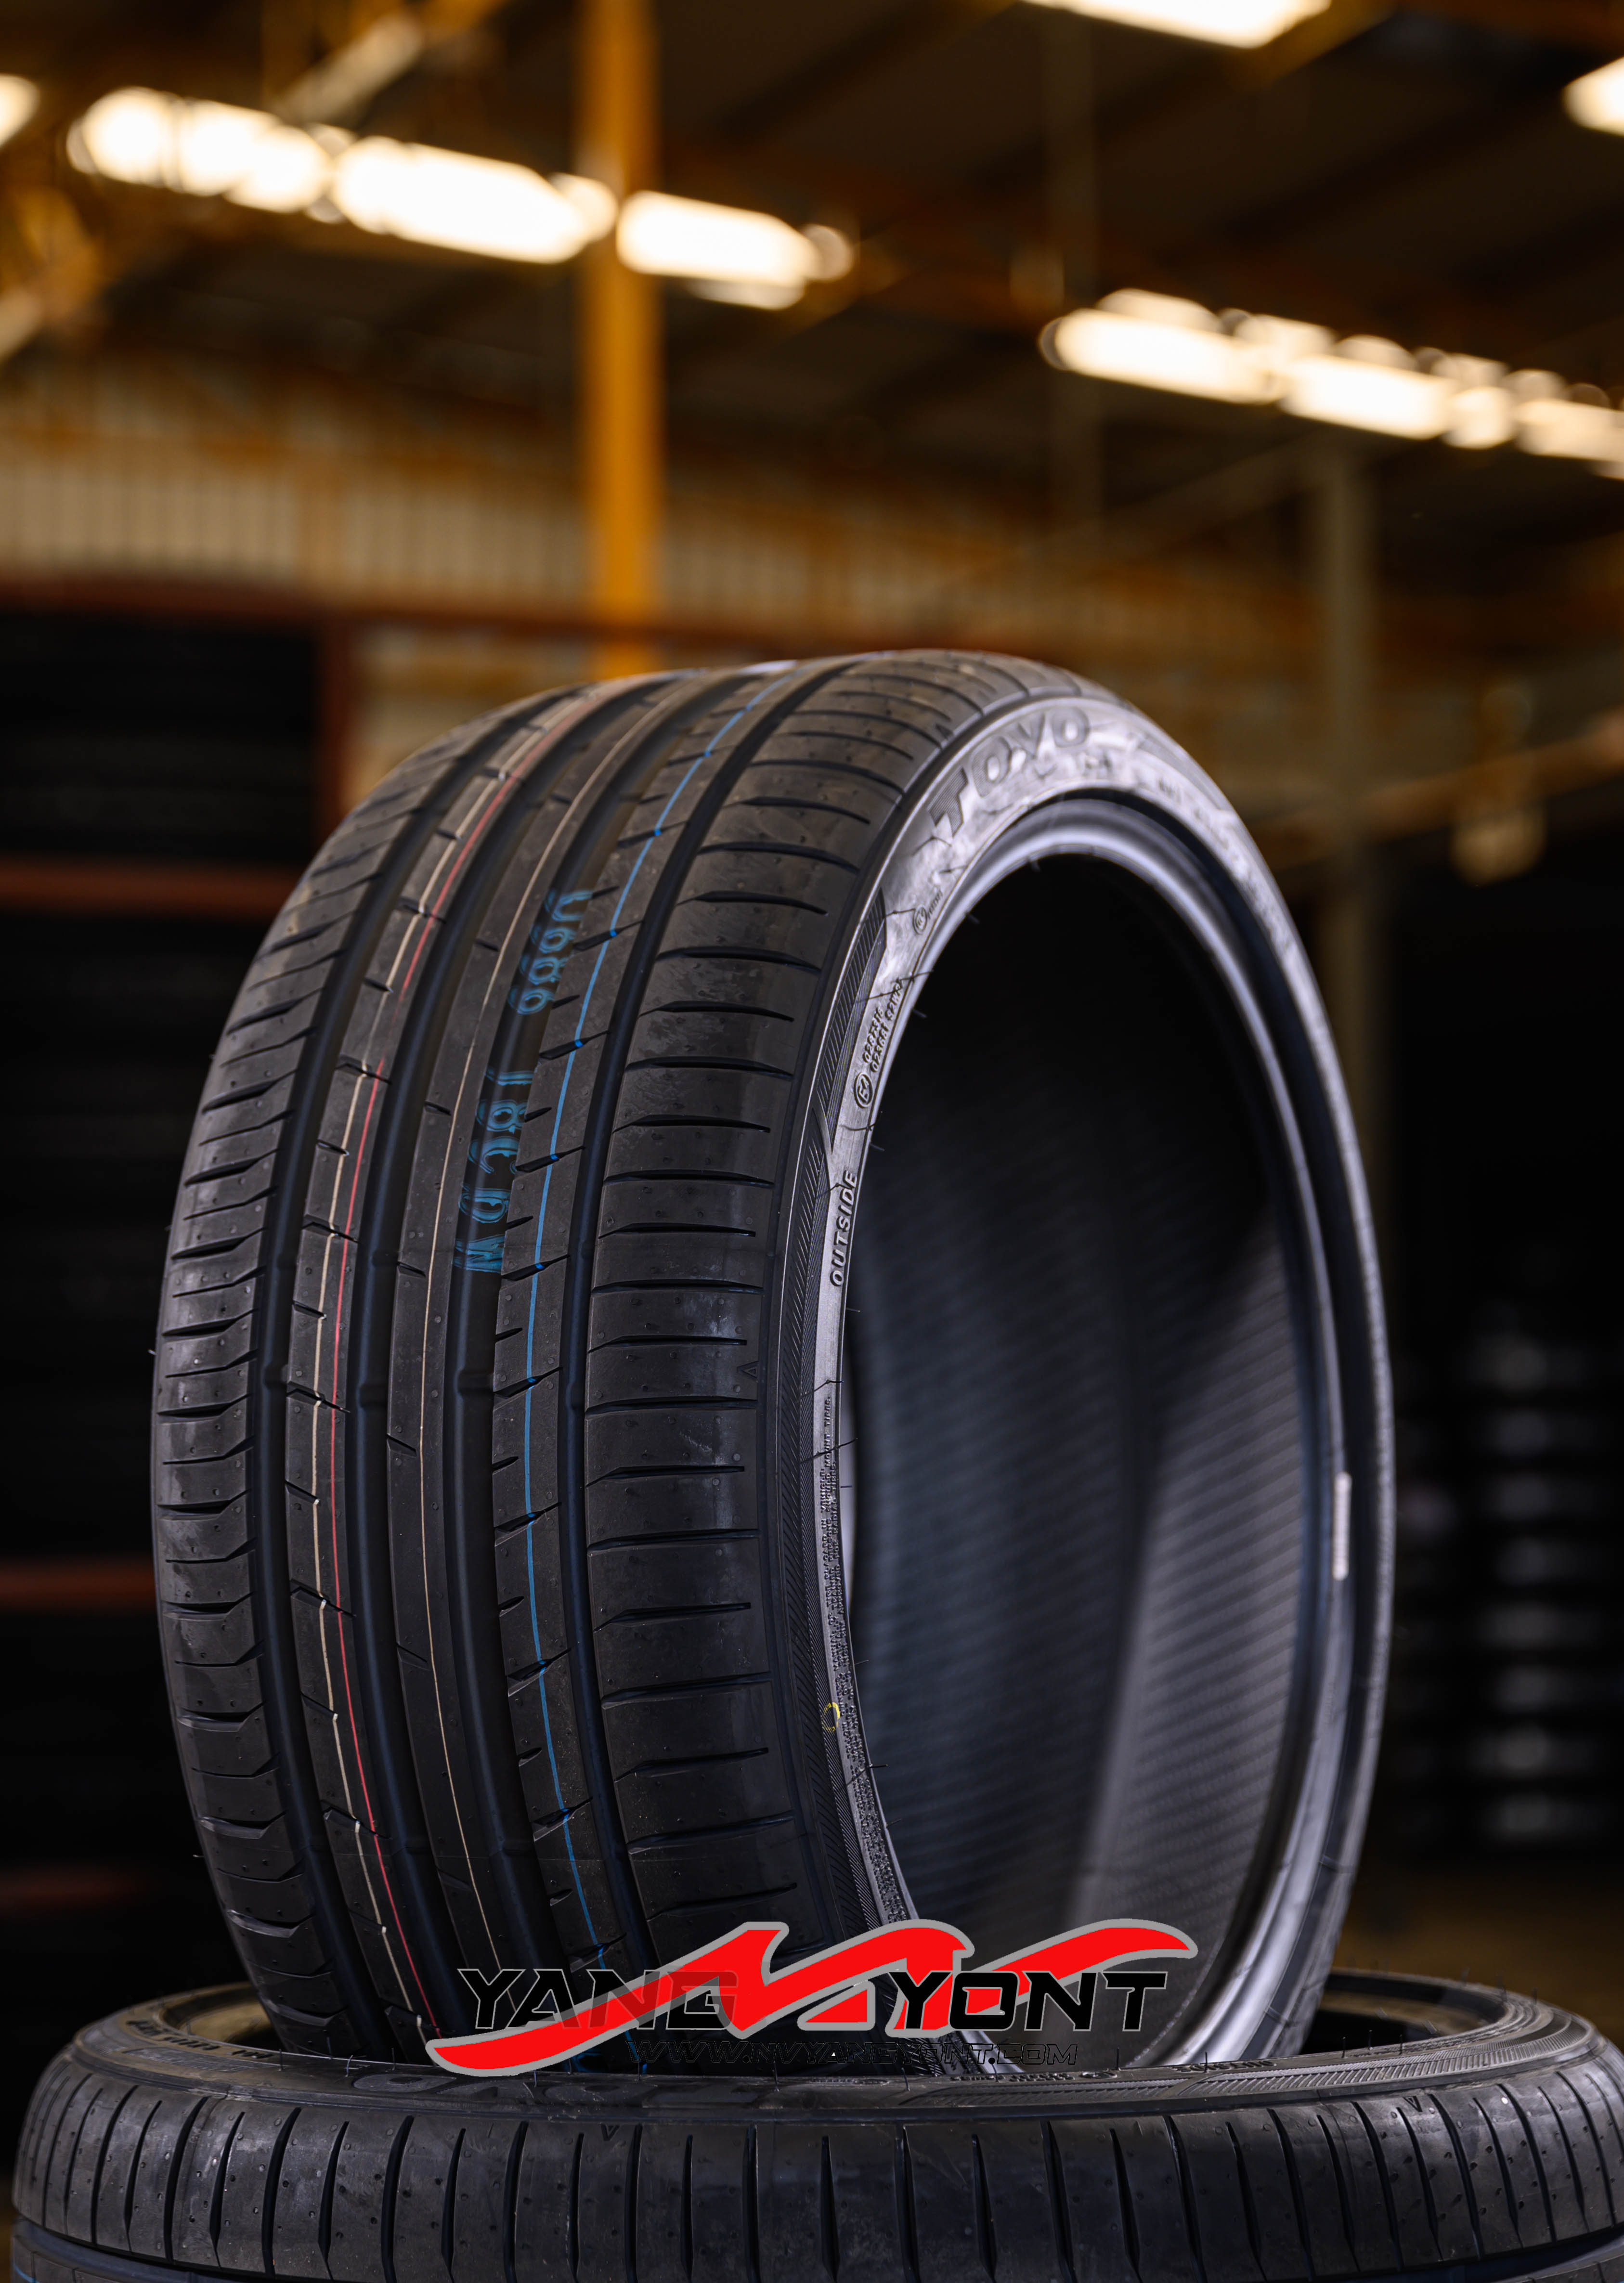 325/30 R19 Proxes Sport